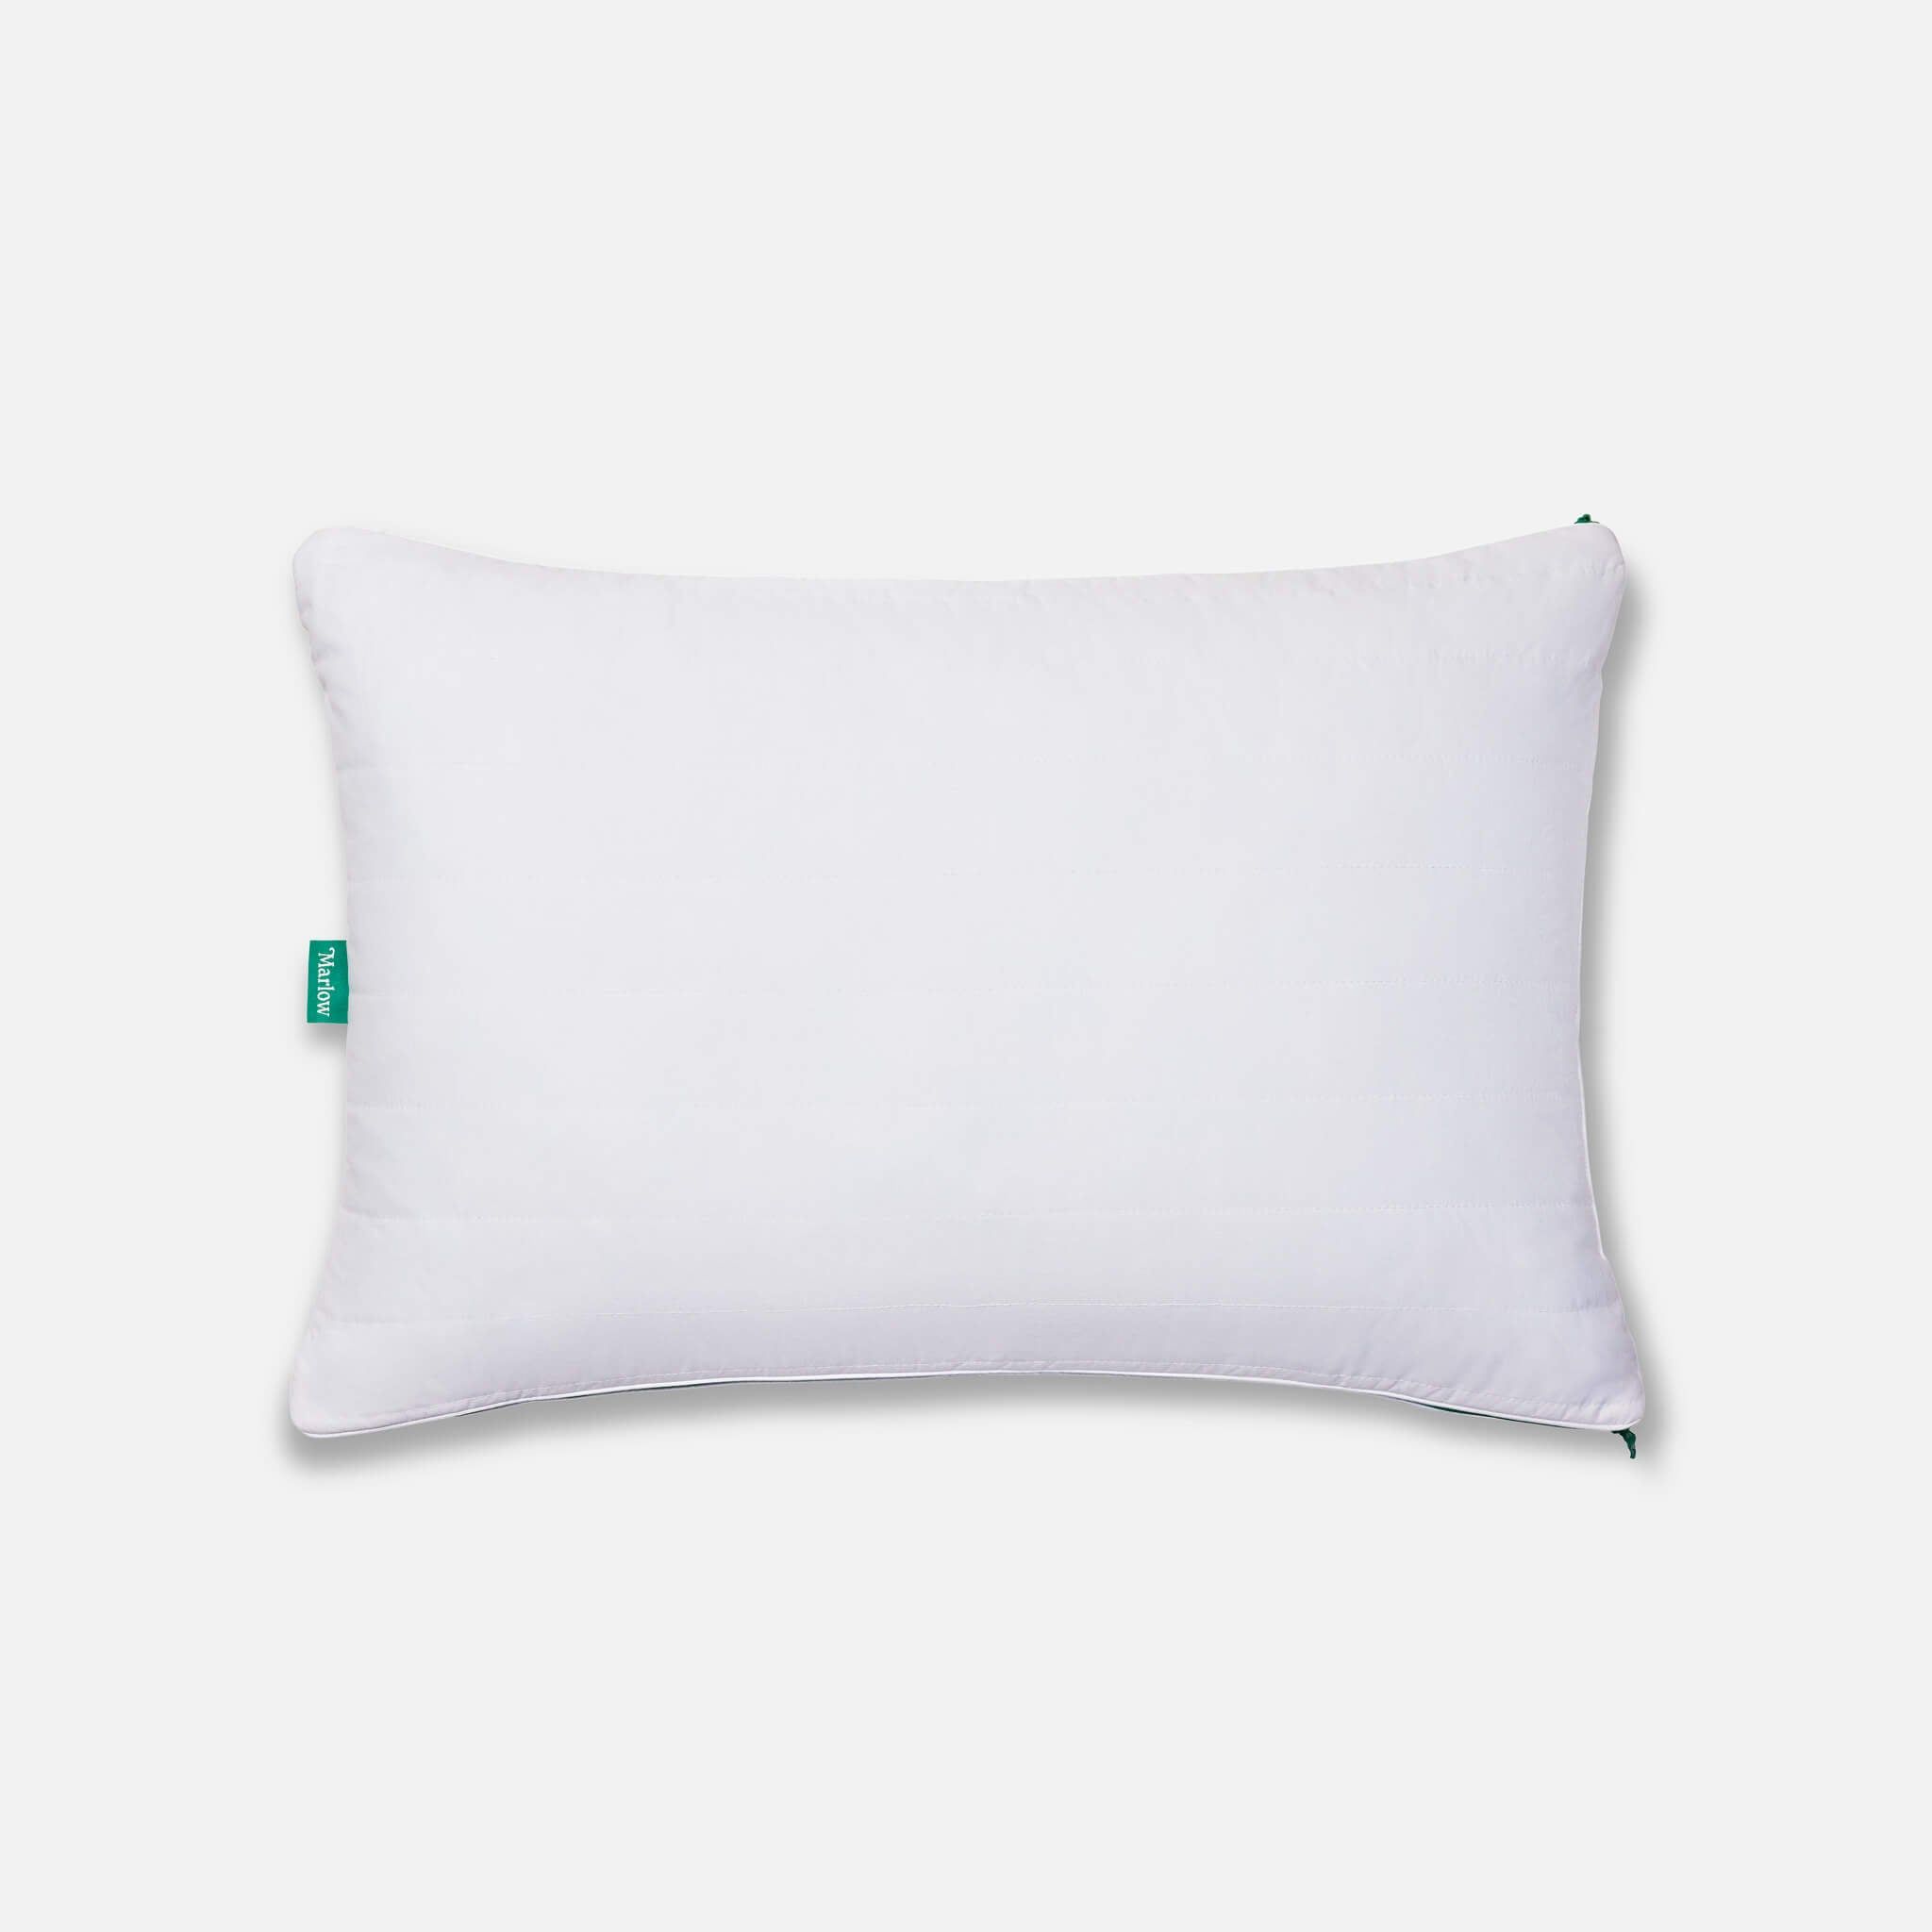 <p><strong>$65.00</strong></p><p><a href="https://go.redirectingat.com?id=74968X1553576&url=https%3A%2F%2Fwww.brooklinen.com%2Fproducts%2Fmarlow-pillow&sref=https%3A%2F%2Fwww.esquire.com%2Flifestyle%2Fg44725550%2Fbest-cooling-pillow%2F">Shop Now</a></p><p>Brooklinen's Marlow pillow is one of our favorites for a well-priced cooling option. It's made with aerated memory foam to give you the support of a foam without its tendency to trap heat. It's wrapped in a cotton shell for all around breathability. The filling is adjustable, too, which makes it good for people who want control over how much support (or not) they're getting. </p>